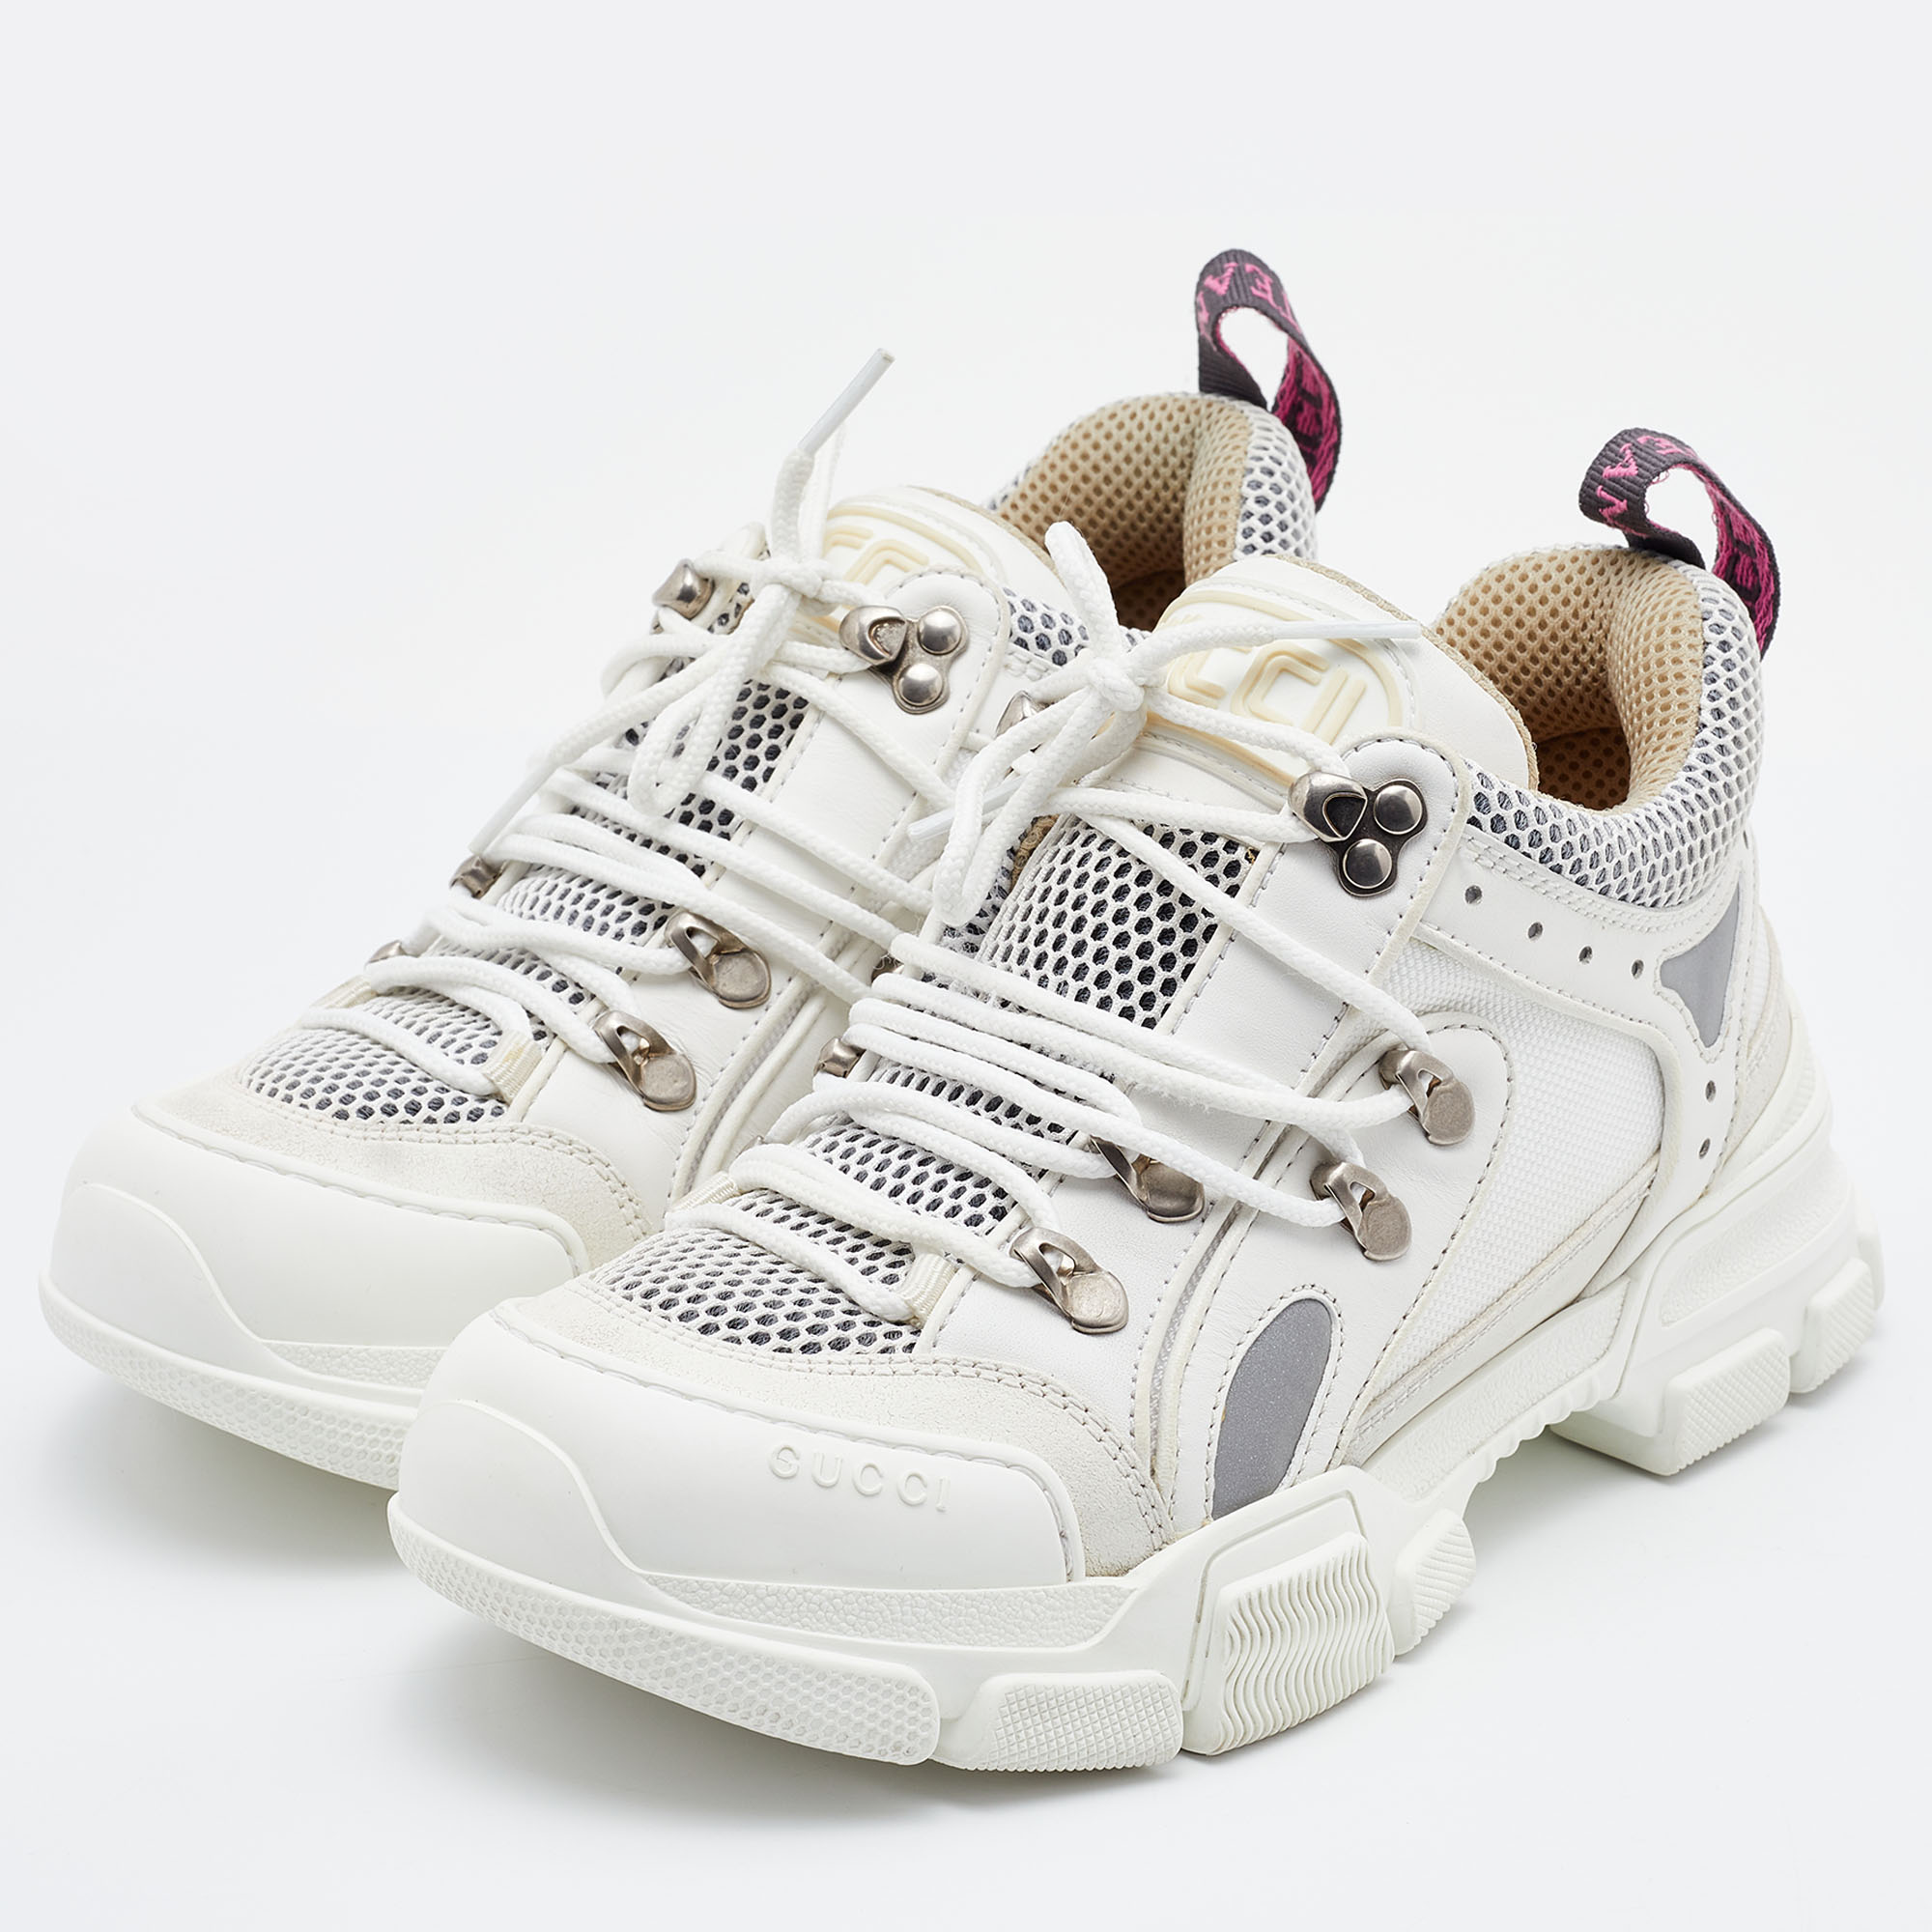 

Gucci White/Cream Mesh and Leather Flashtrek Sneakers Size